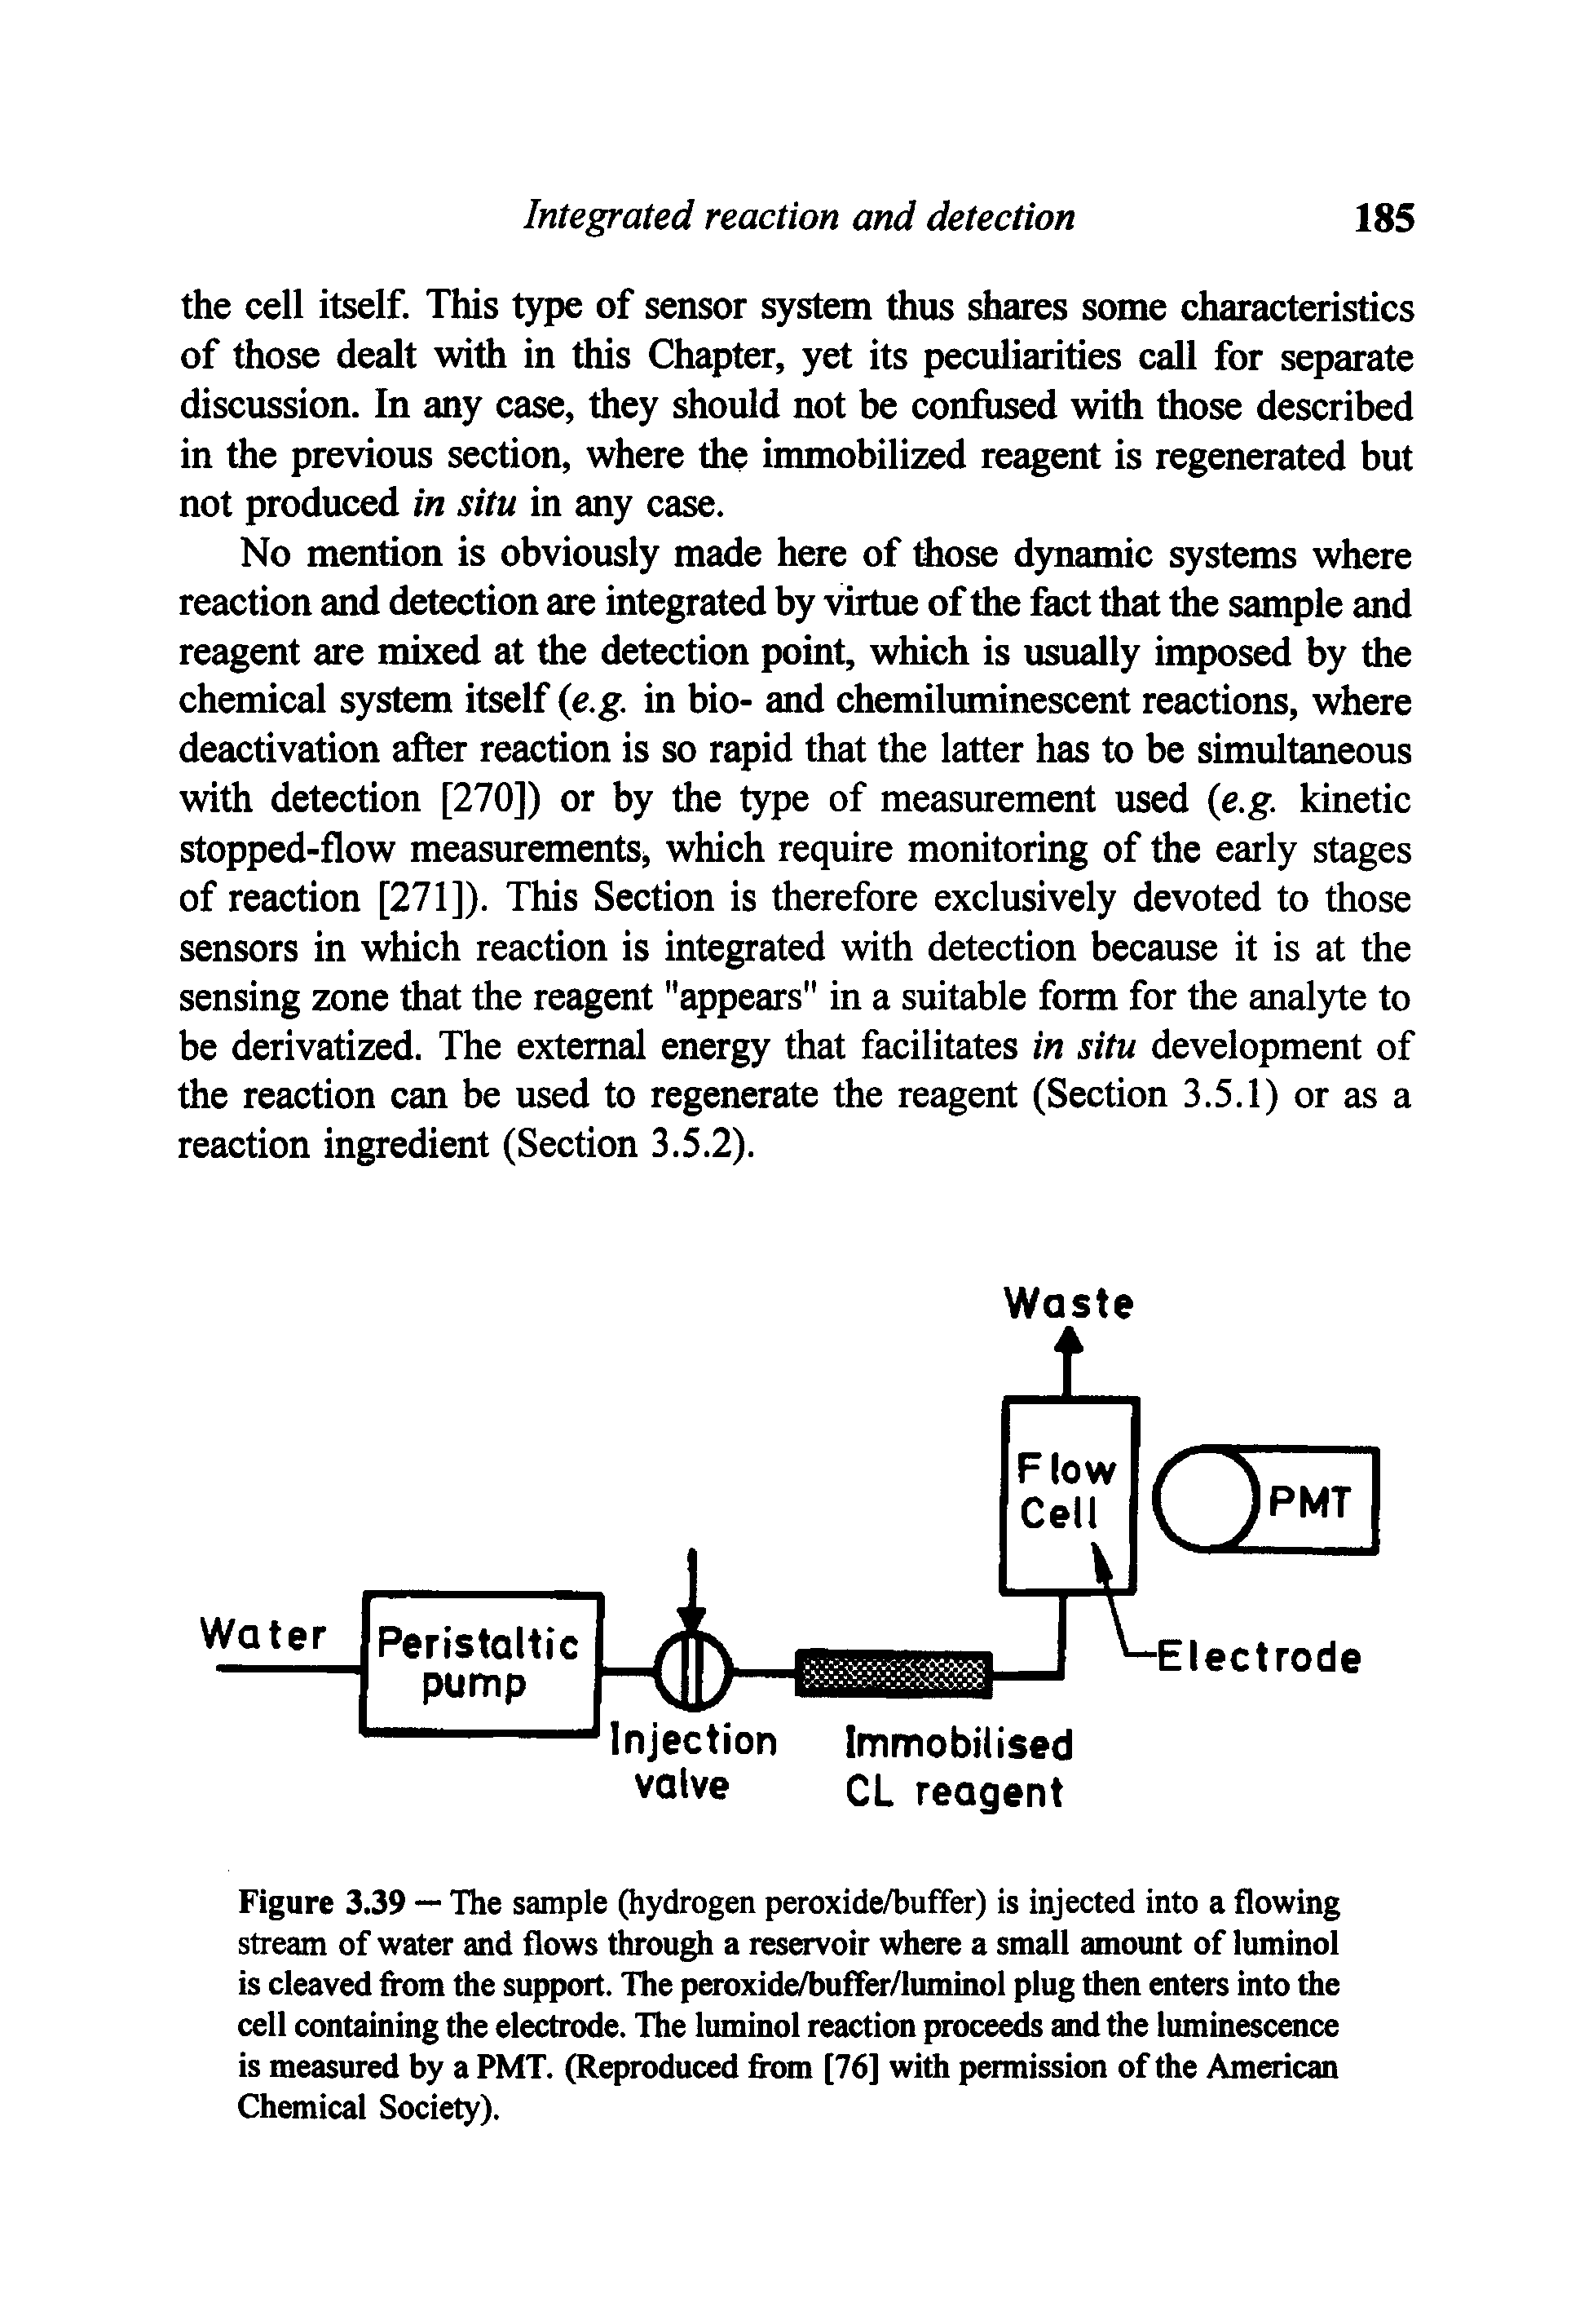 Figure 3.39 — The sample (hydrogen peroxide/buffer) is injected into a flowing stream of water and flows through a reservoir where a small amount of luminol is cleaved from the support. The peroxide/buffer/luminol plug then enters into the cell containing the electrode. The luminol reaction proceeds and the liuninescence is measured by a PMT. (Reproduced from [76] with permission of the American Chemical Society).